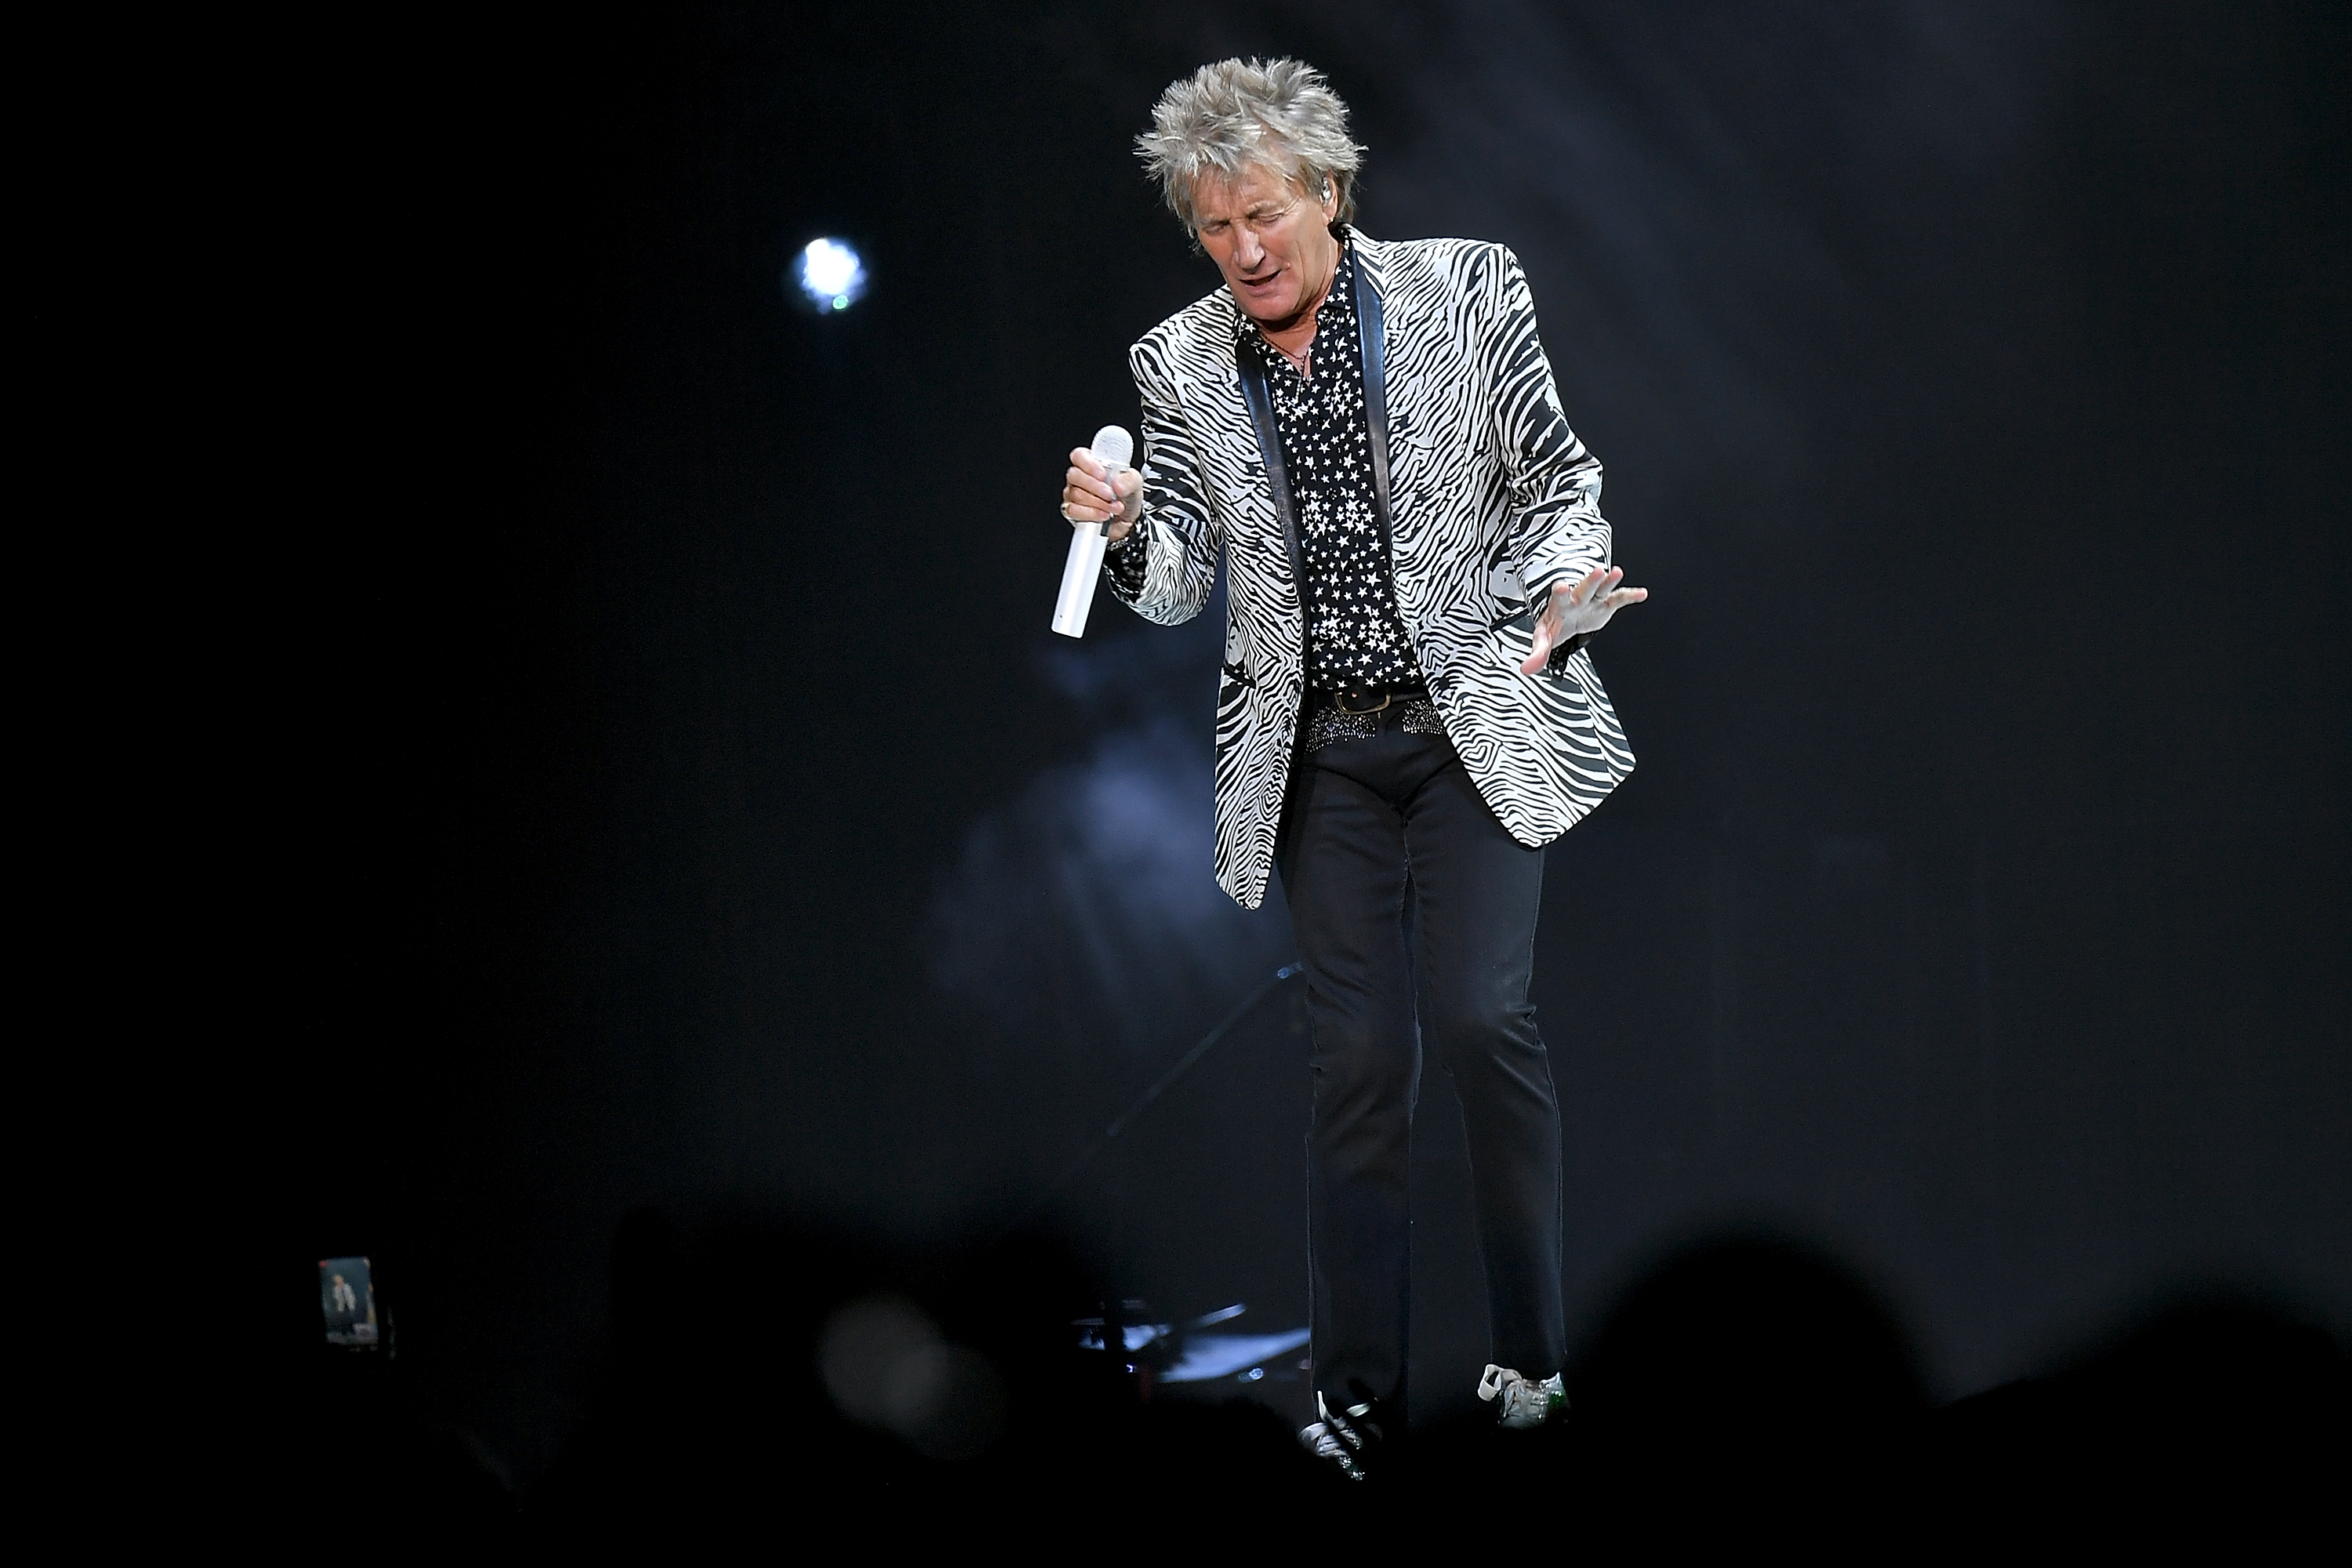 Rod Stewart on August 7, 2018 in New York City | Source: Getty Images